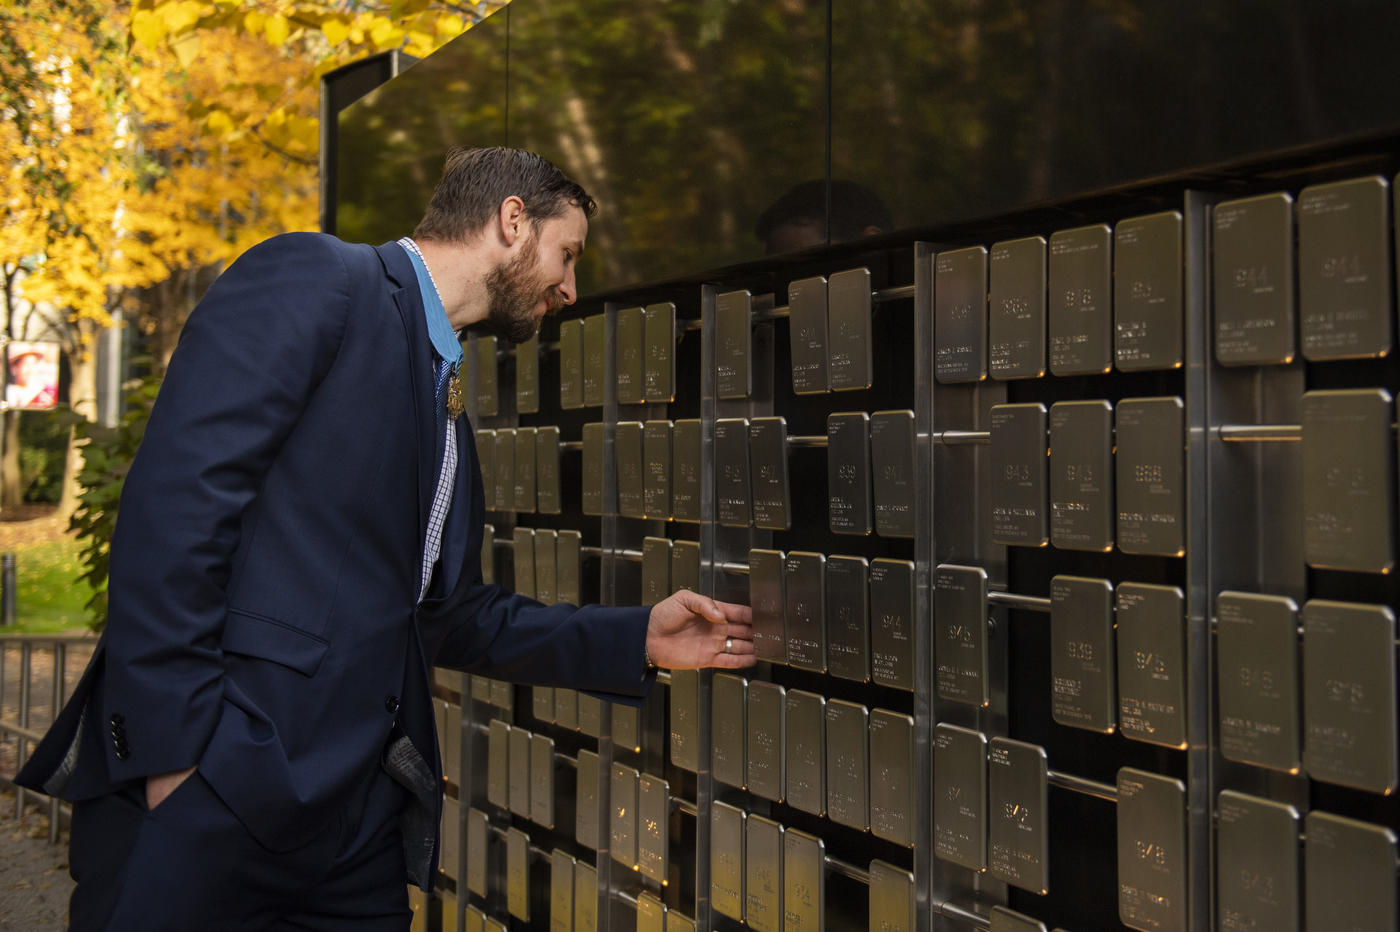 man in suit and tie examines rows of plaques